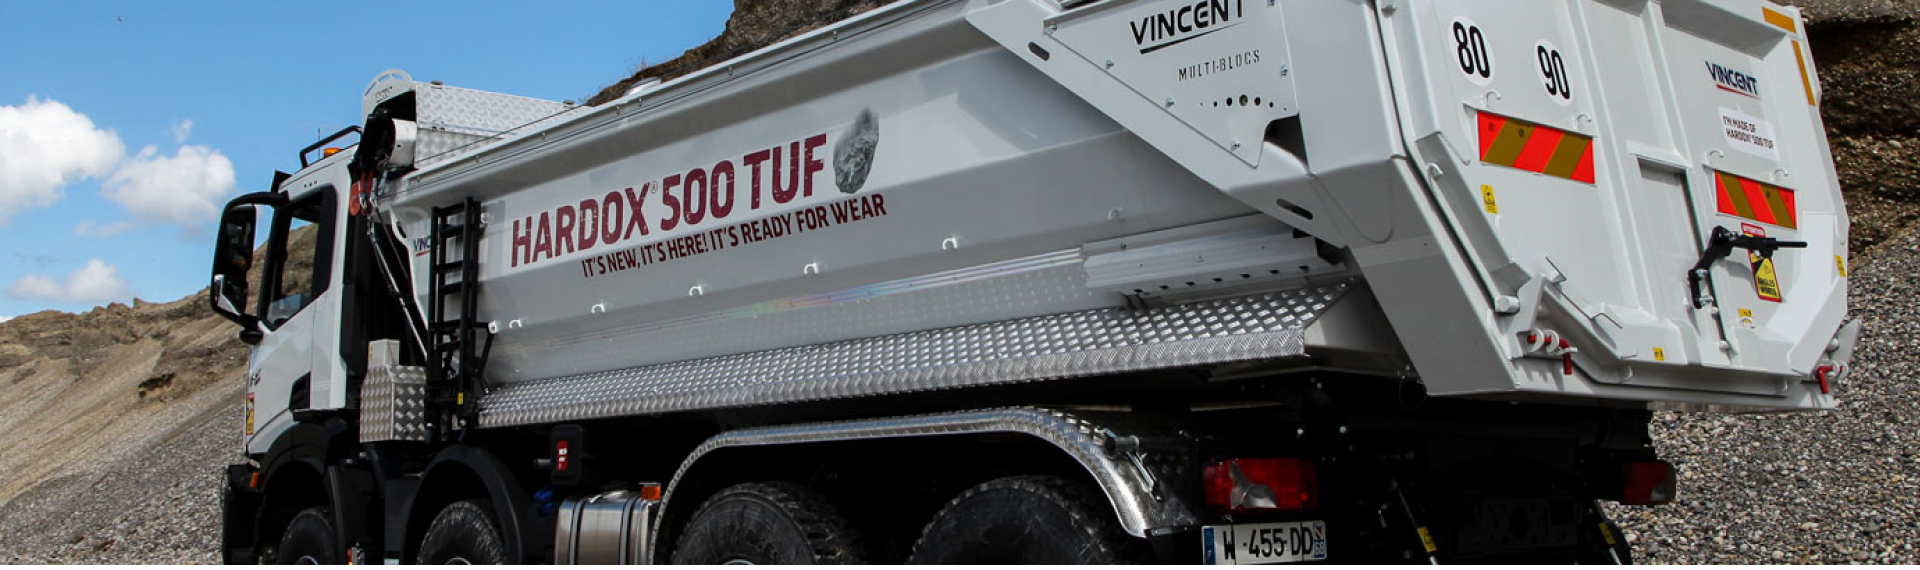 Tipper truck on a job site with body made in Hardox® 500 Tuf steel, with the slogan It’s New, It’s Here, It’s Ready For Wear!  